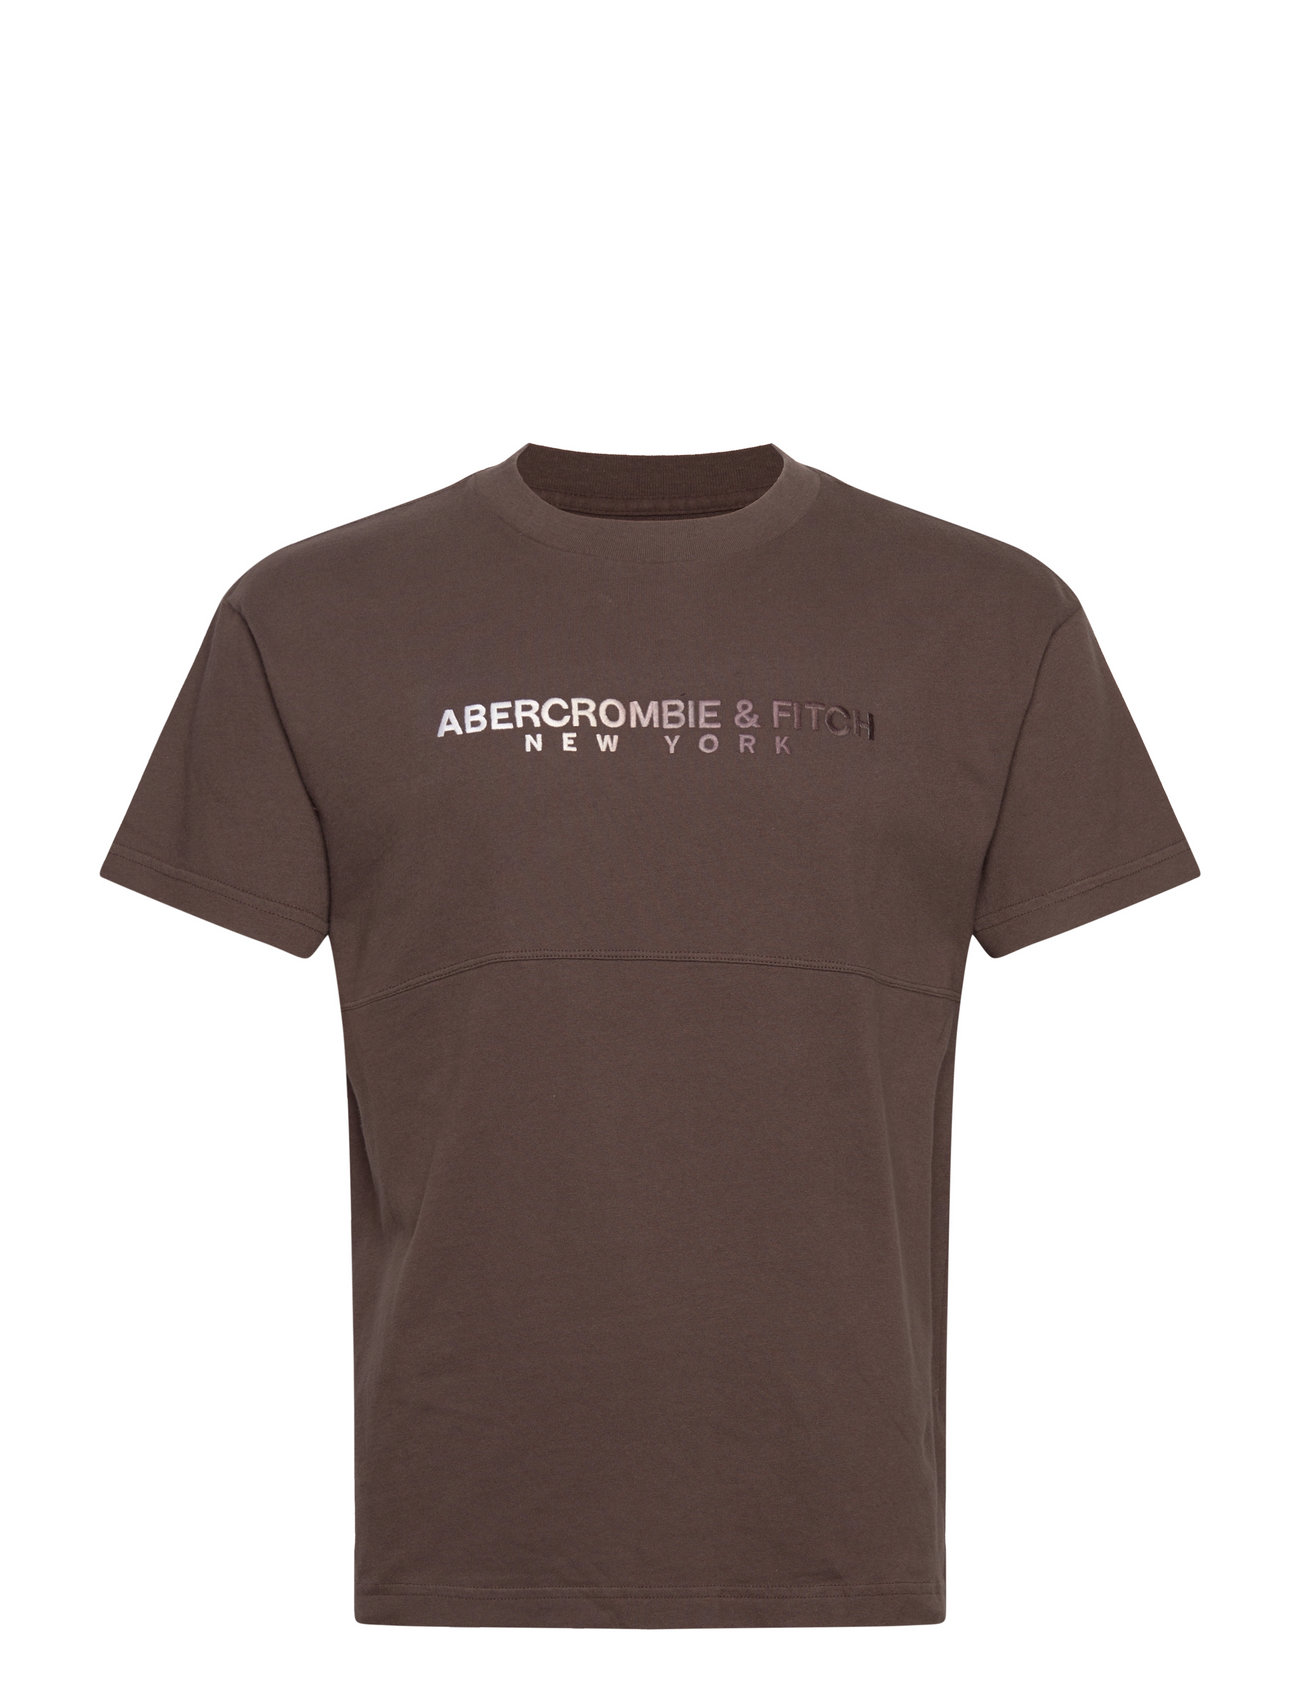 Anf Mens Graphics T-shirts Short-sleeved Brun Abercrombie & Fitch